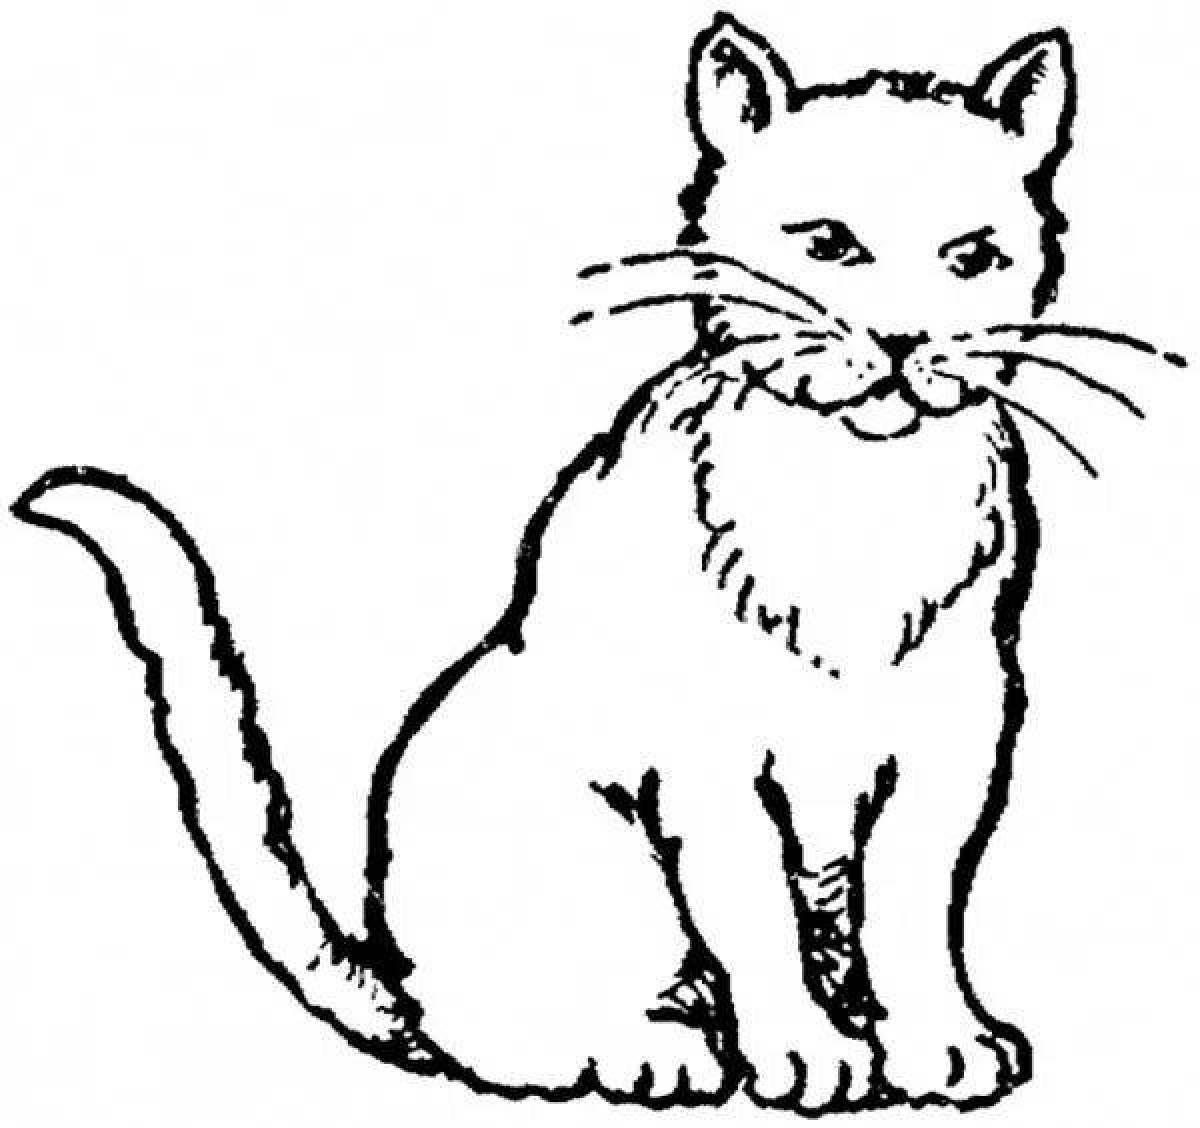 Adorable black cat coloring page